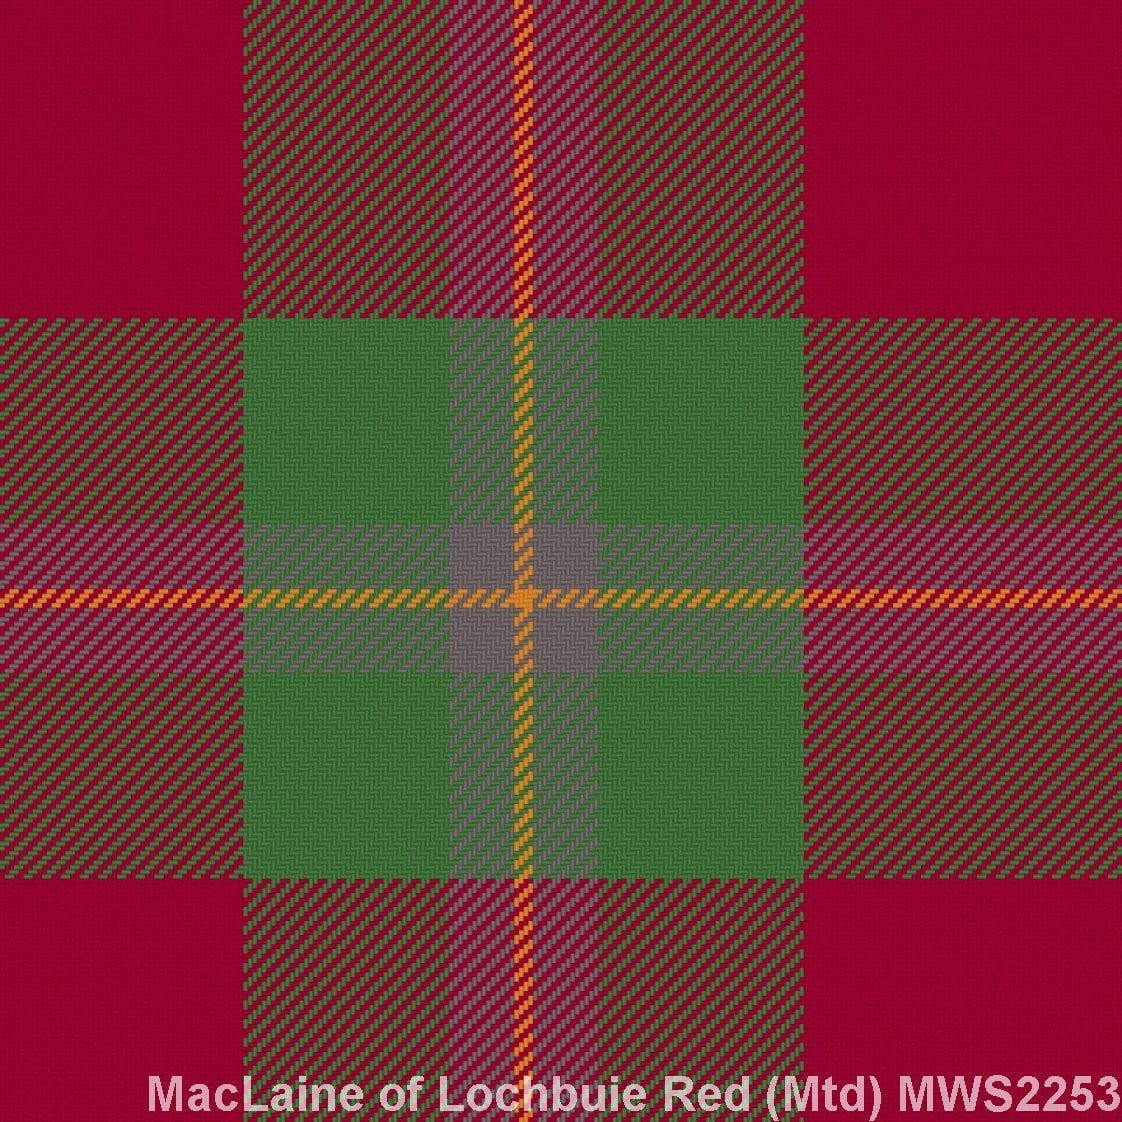 MacLaine of Lochbuie Red Muted